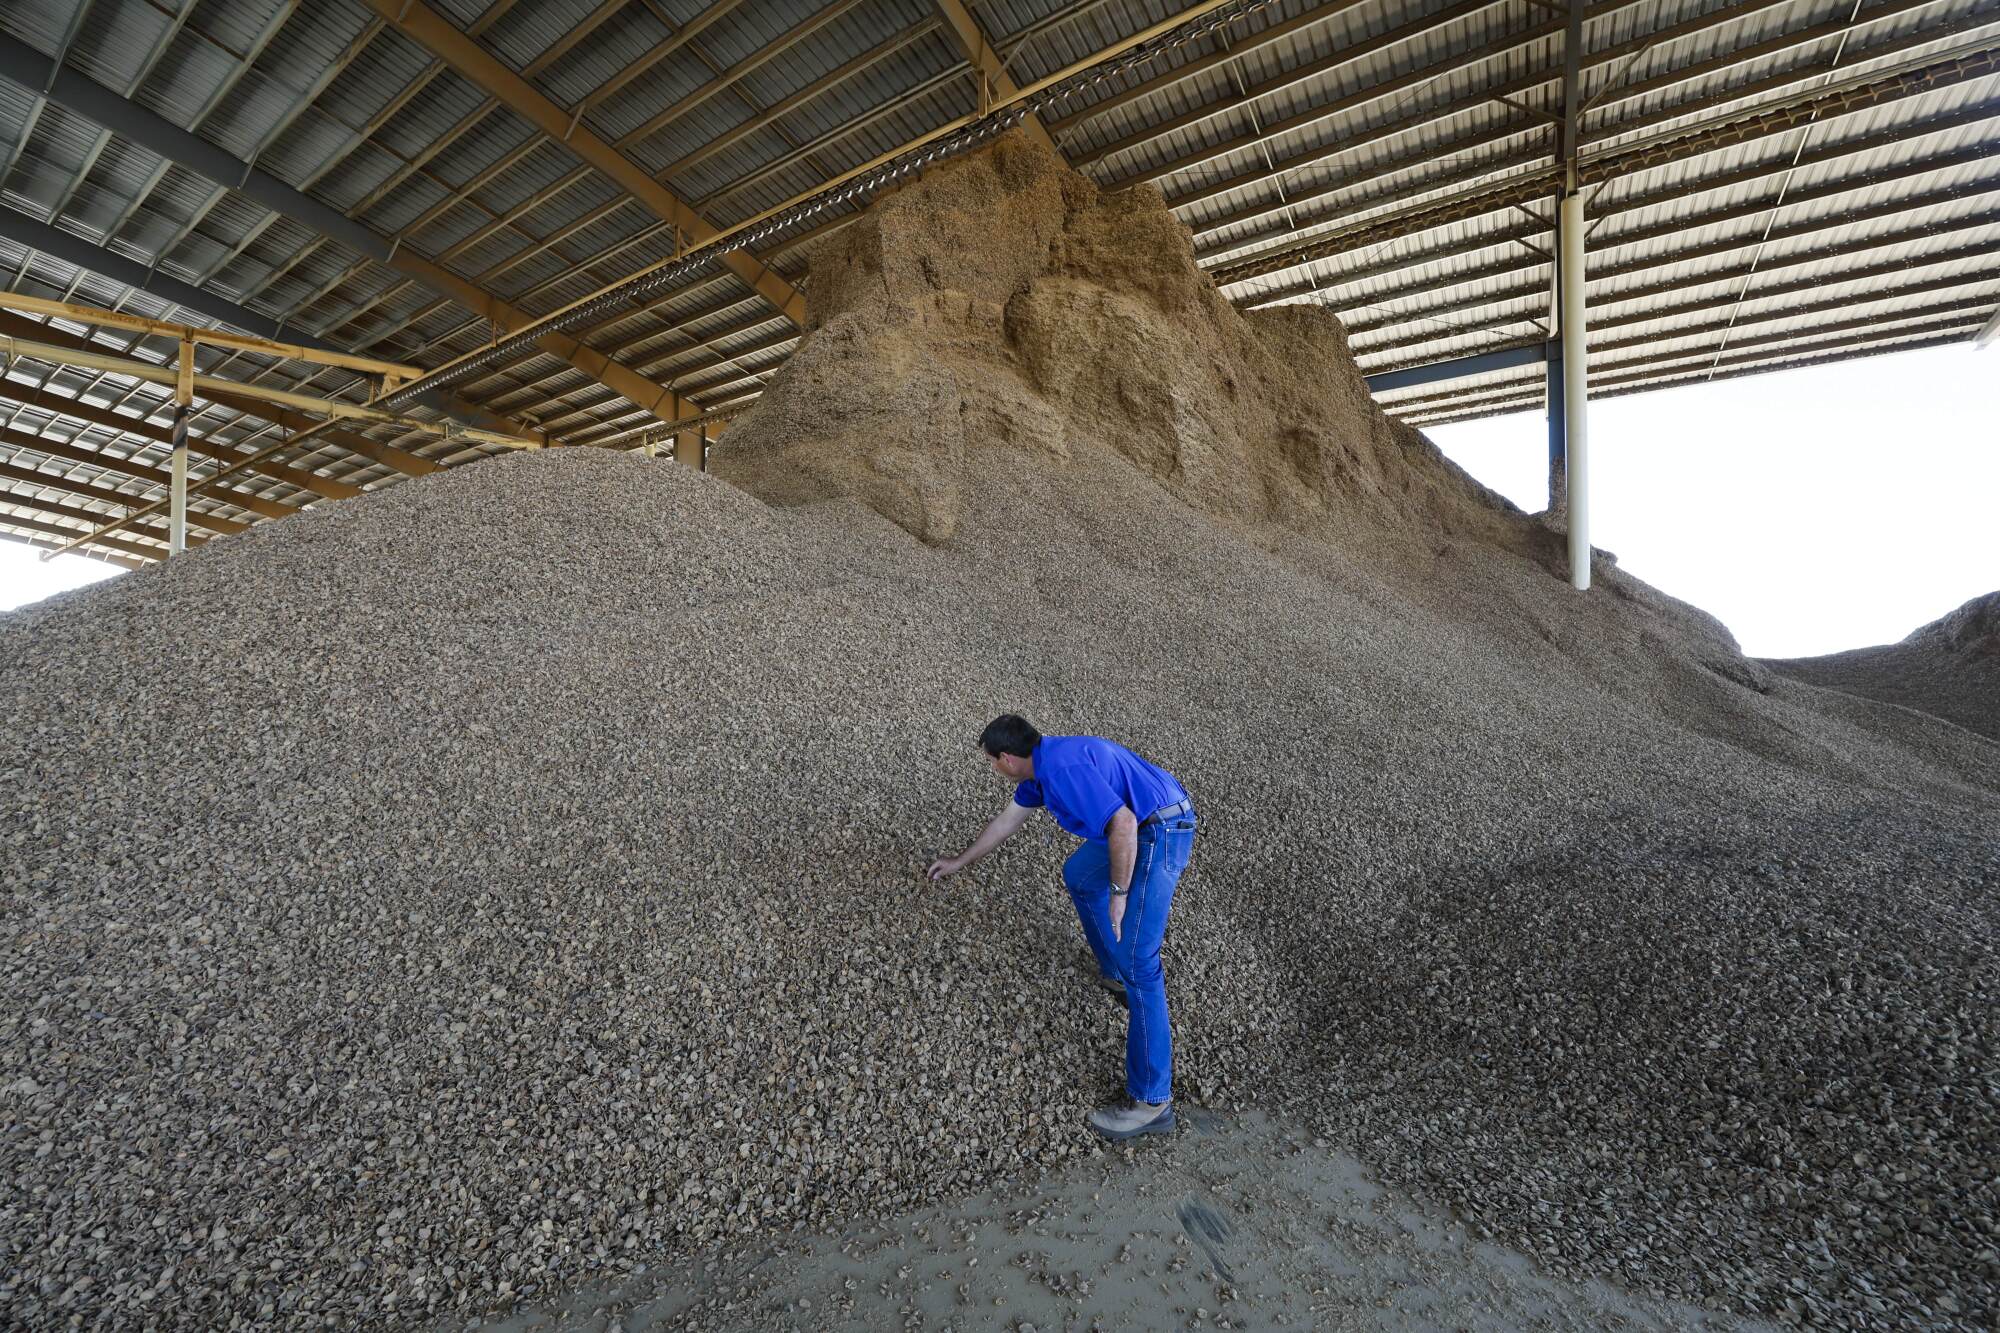 Scott Phippen next to a pile of hulls and shells that will be sold as cattle feed in Manteca.